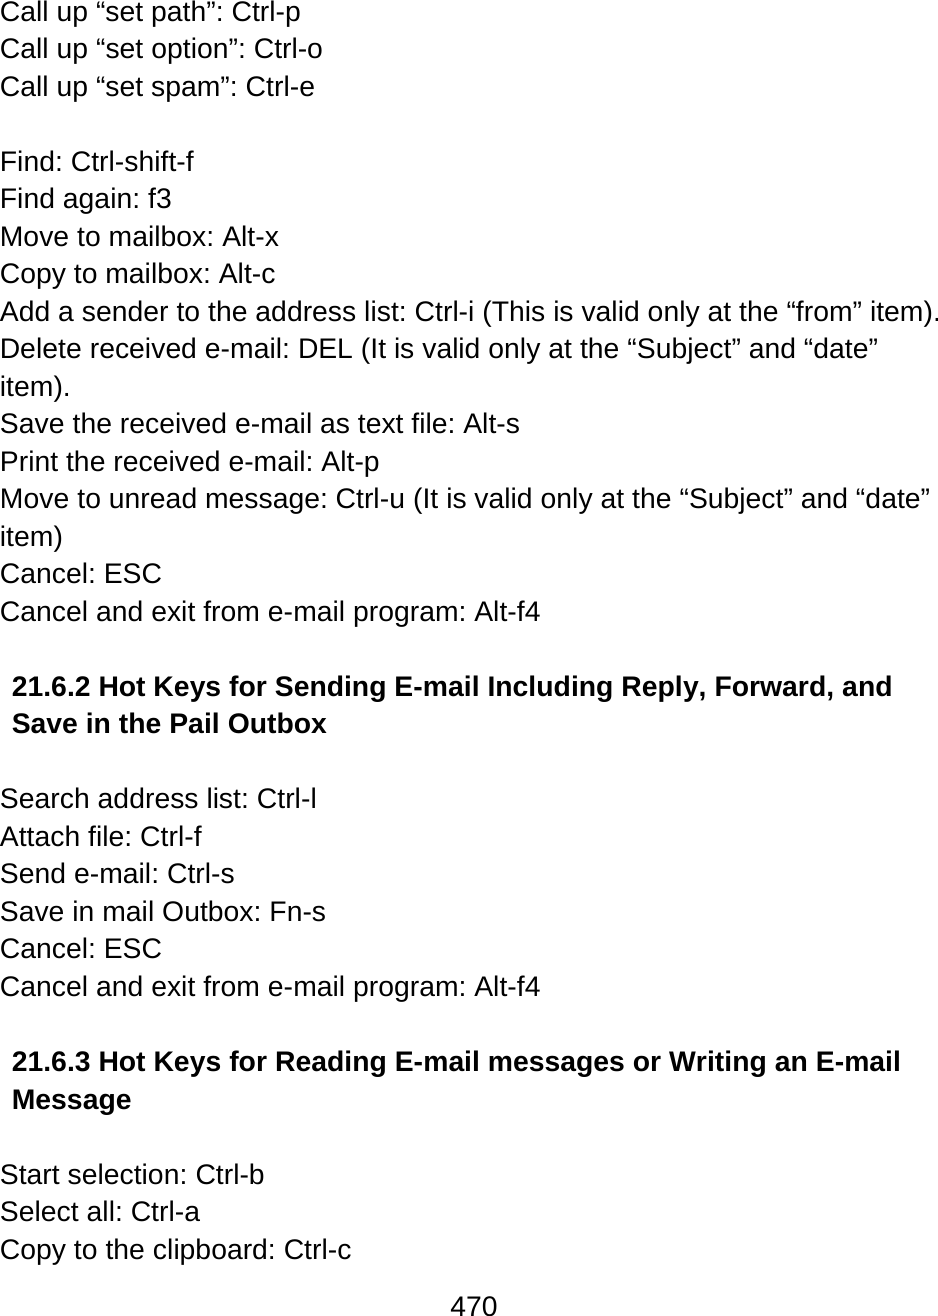 470  Call up “set path”: Ctrl-p Call up “set option”: Ctrl-o Call up “set spam”: Ctrl-e  Find: Ctrl-shift-f Find again: f3  Move to mailbox: Alt-x Copy to mailbox: Alt-c Add a sender to the address list: Ctrl-i (This is valid only at the “from” item). Delete received e-mail: DEL (It is valid only at the “Subject” and “date” item). Save the received e-mail as text file: Alt-s Print the received e-mail: Alt-p Move to unread message: Ctrl-u (It is valid only at the “Subject” and “date” item) Cancel: ESC Cancel and exit from e-mail program: Alt-f4  21.6.2 Hot Keys for Sending E-mail Including Reply, Forward, and Save in the Pail Outbox  Search address list: Ctrl-l Attach file: Ctrl-f Send e-mail: Ctrl-s Save in mail Outbox: Fn-s Cancel: ESC Cancel and exit from e-mail program: Alt-f4  21.6.3 Hot Keys for Reading E-mail messages or Writing an E-mail Message   Start selection: Ctrl-b Select all: Ctrl-a Copy to the clipboard: Ctrl-c 